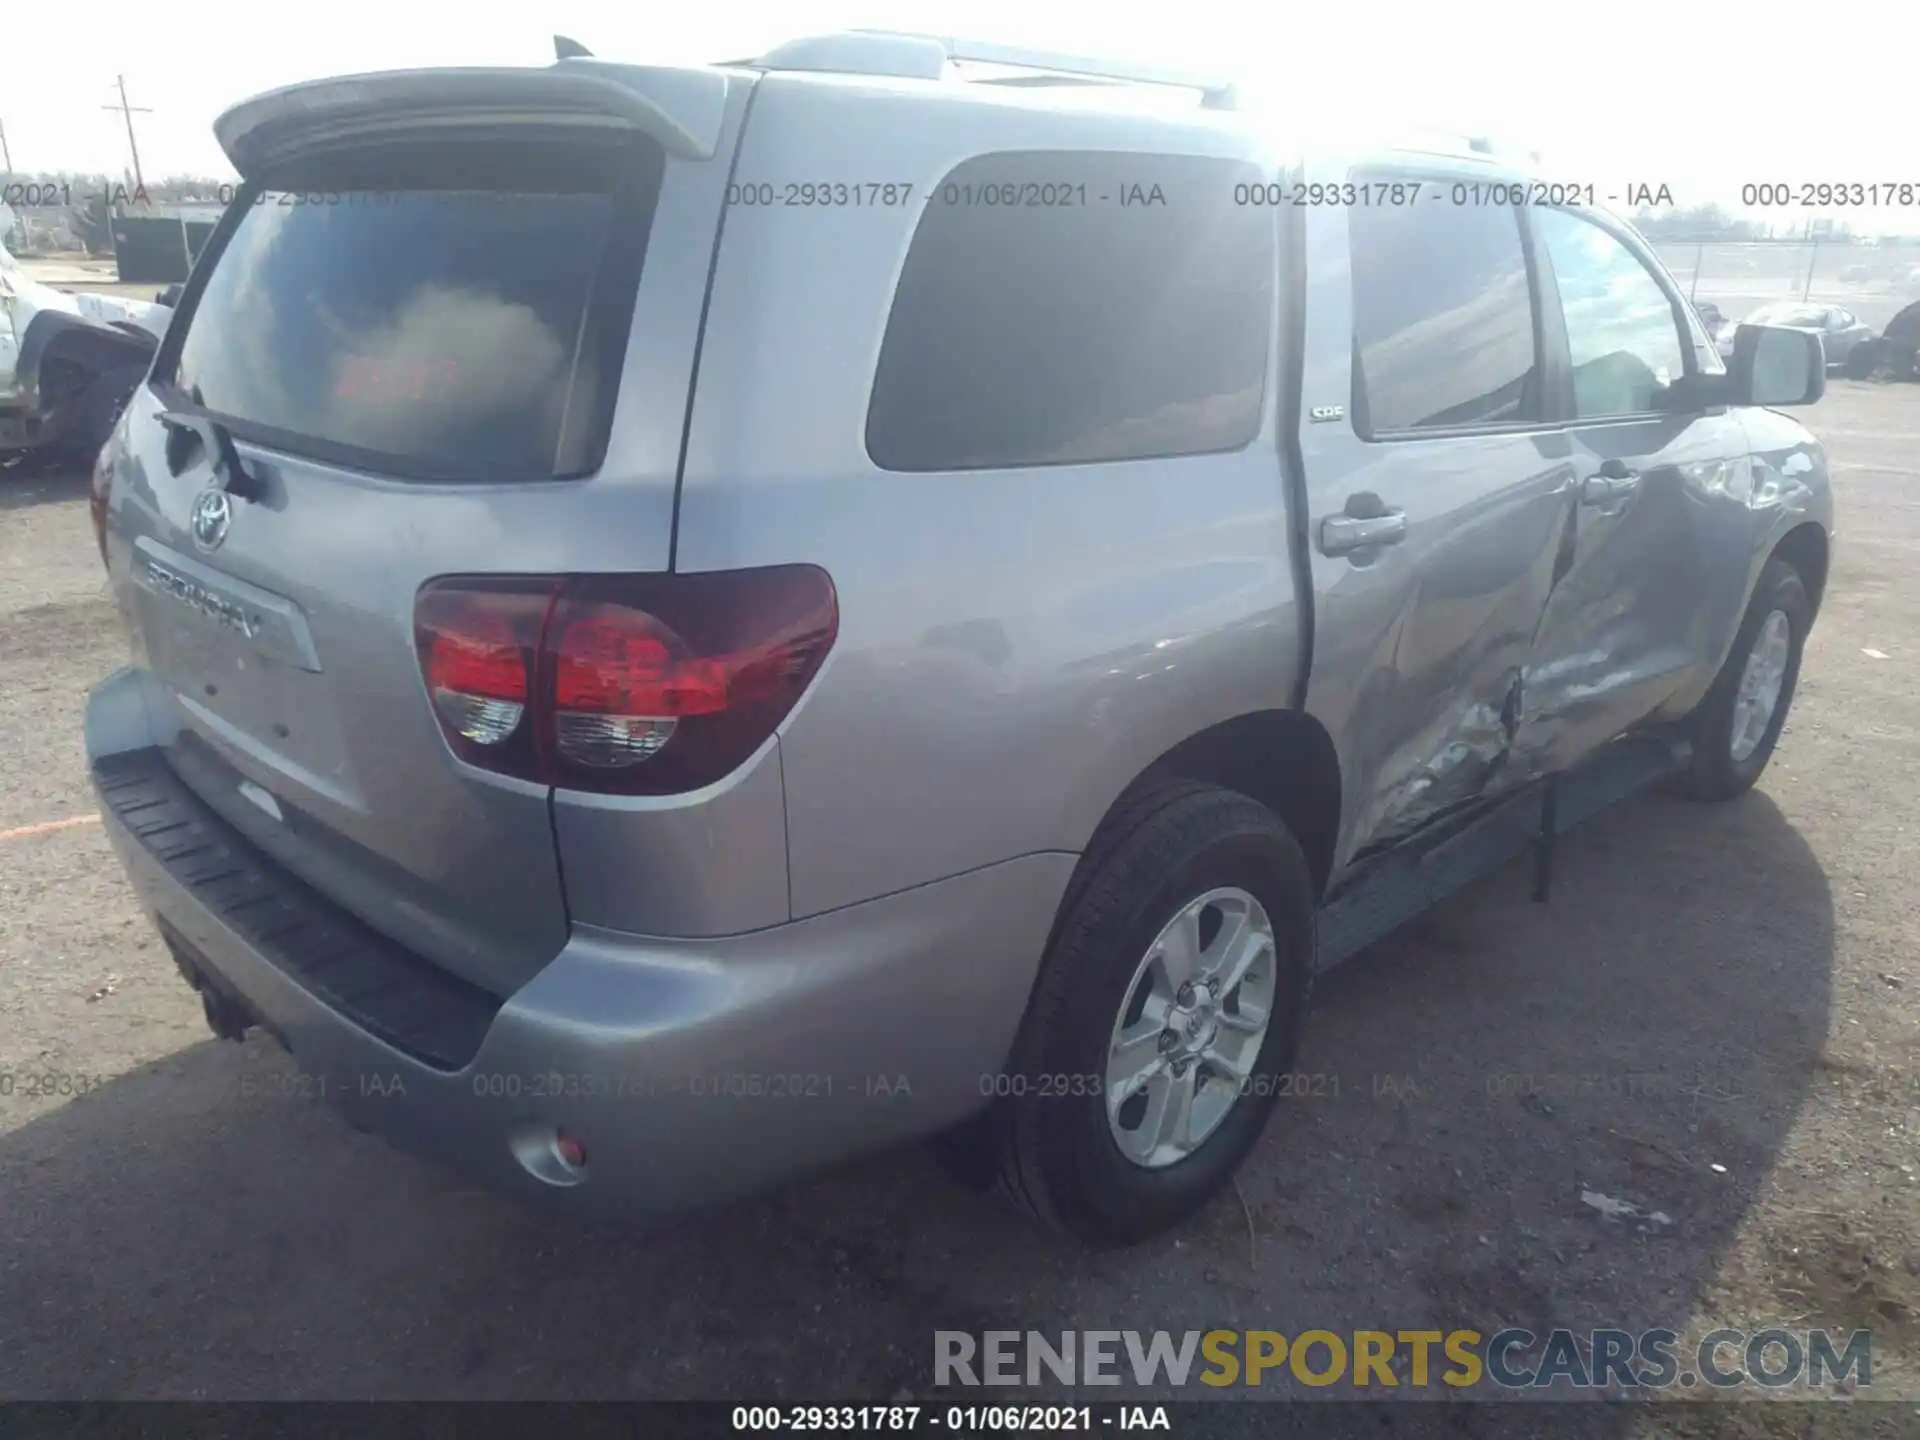 4 Photograph of a damaged car 5TDBY5G19KS166580 TOYOTA SEQUOIA 2019